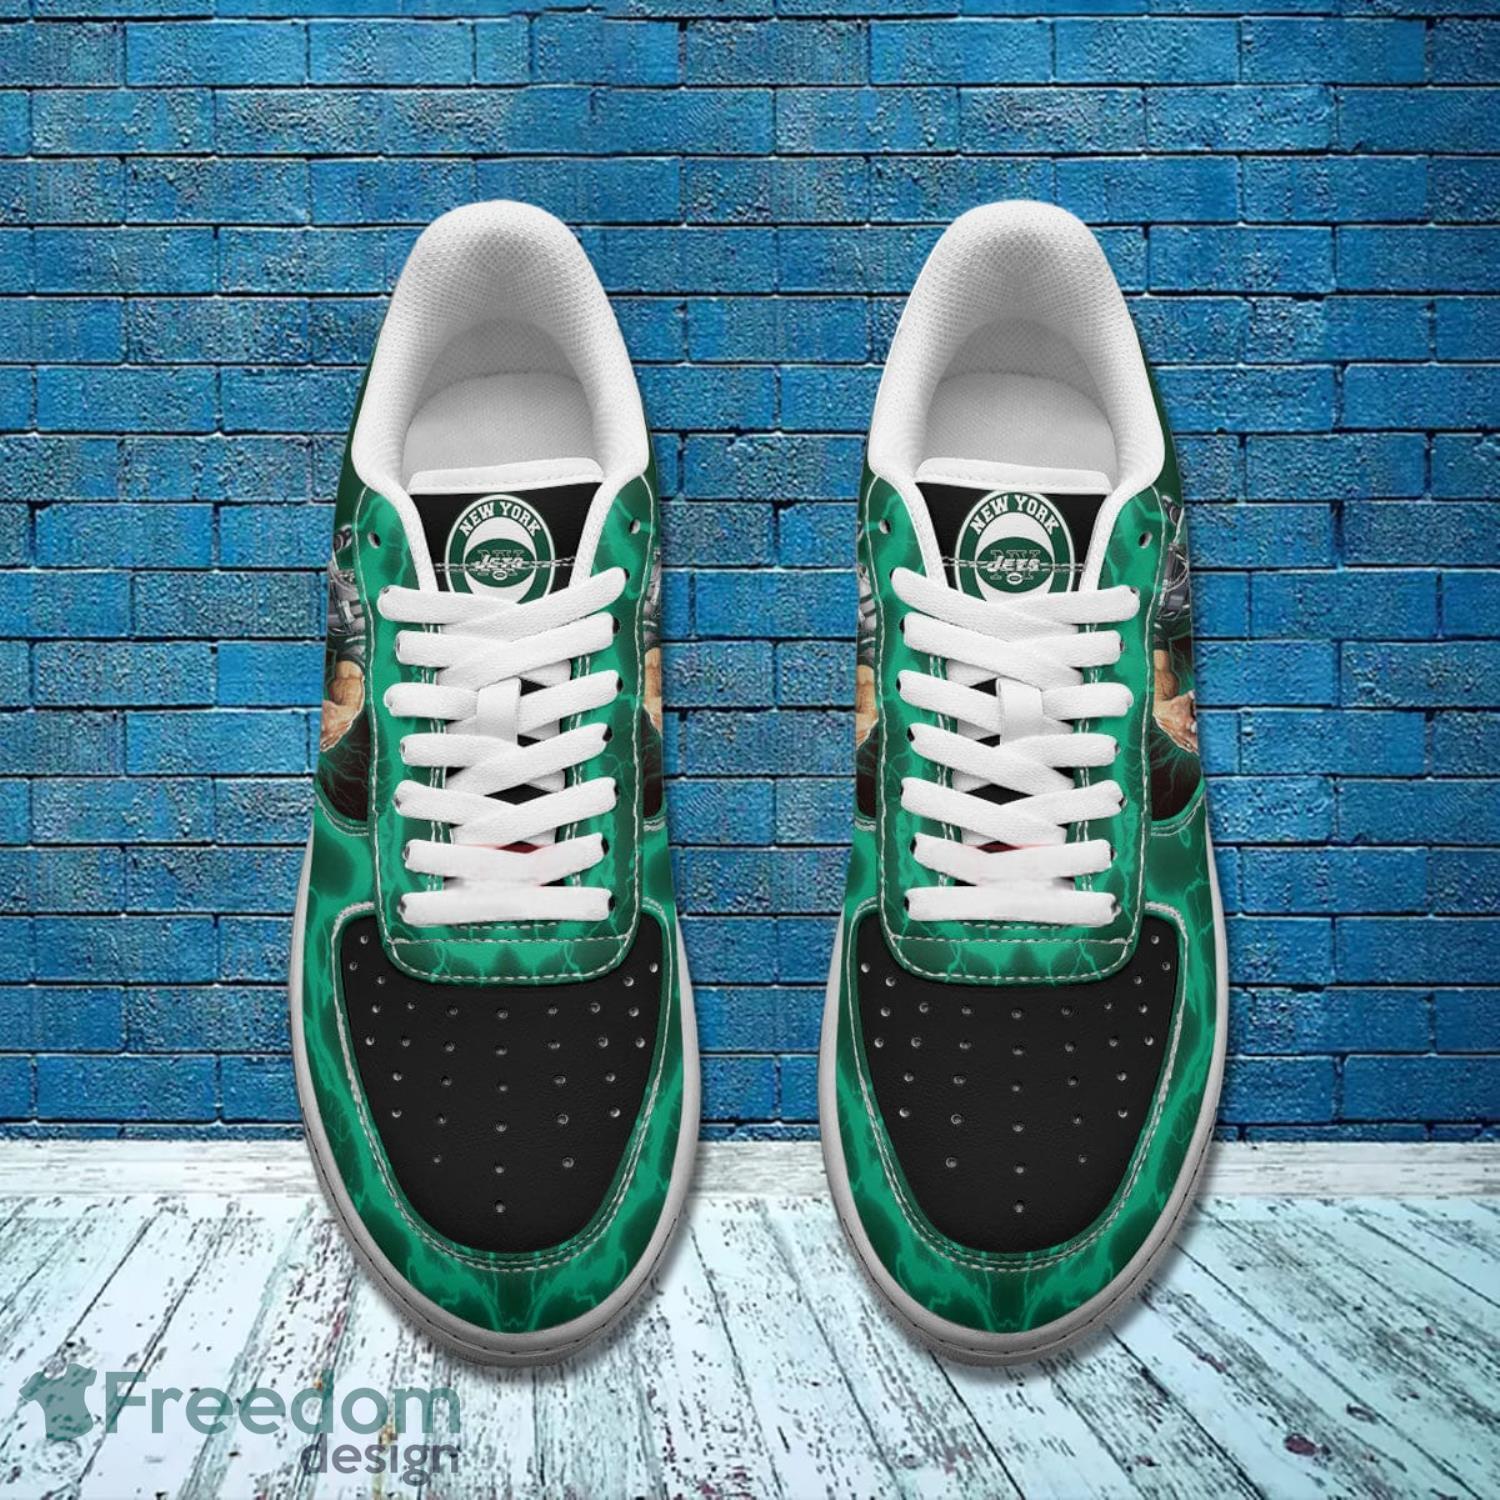 New York Jets NFL Air Force Shoes Gift For Fans